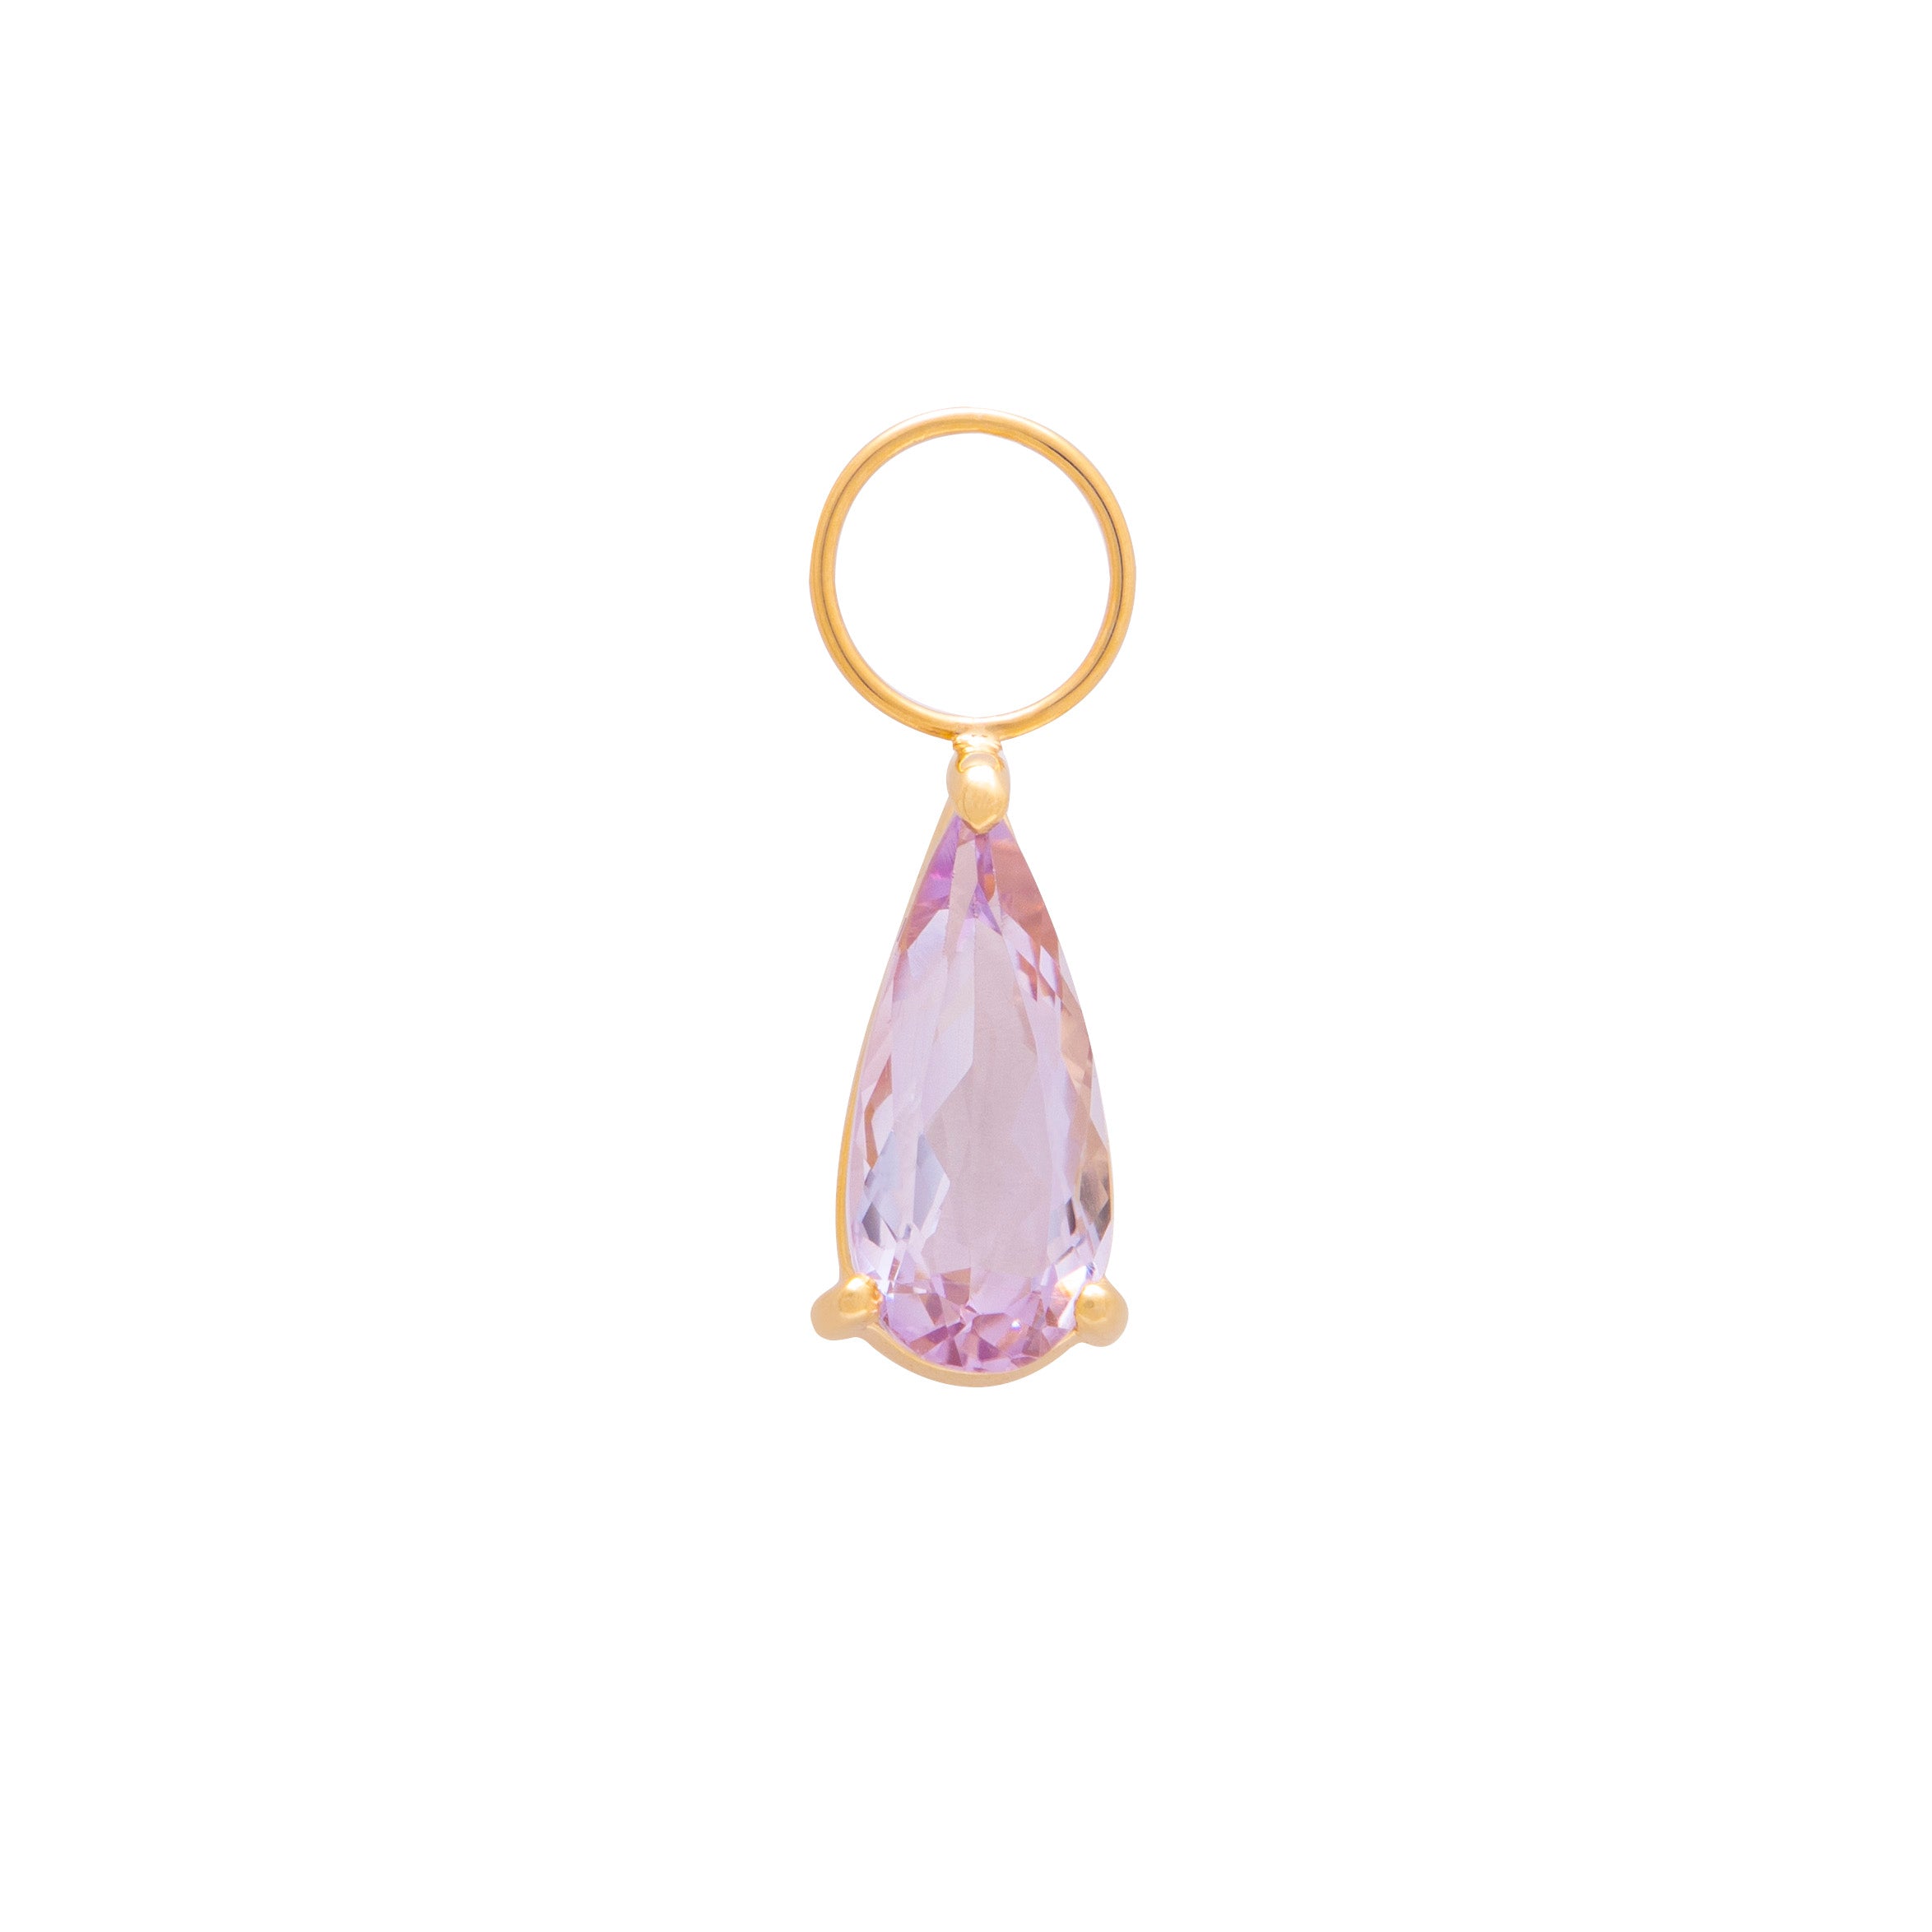 SMALL ROCK DROP PENDANT IN 18K YELLOW GOLD PLATED SILVER WITH AMETHYST